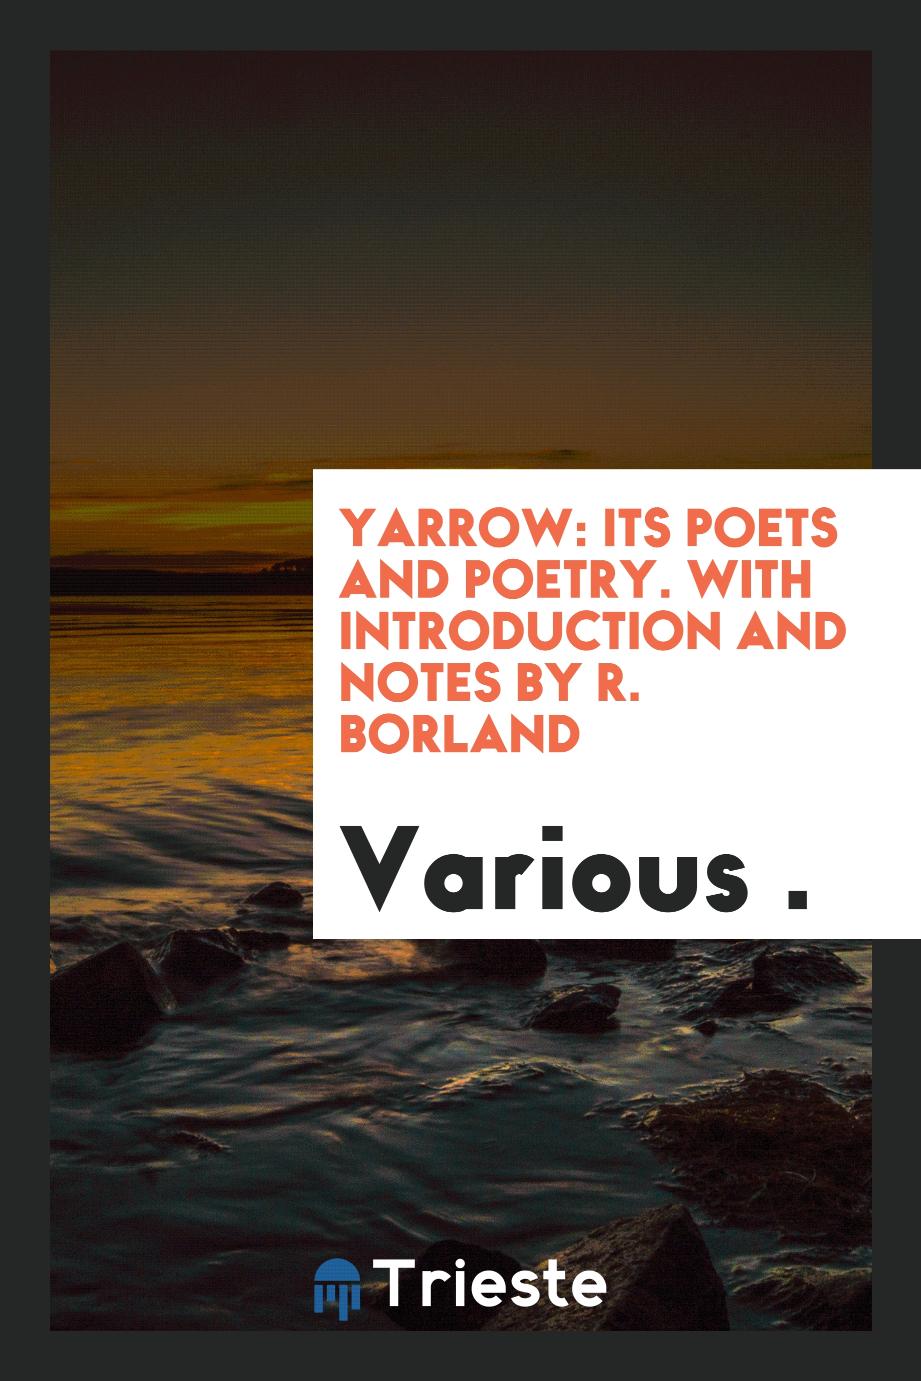 Yarrow: Its Poets and Poetry. With Introduction and Notes by R. Borland